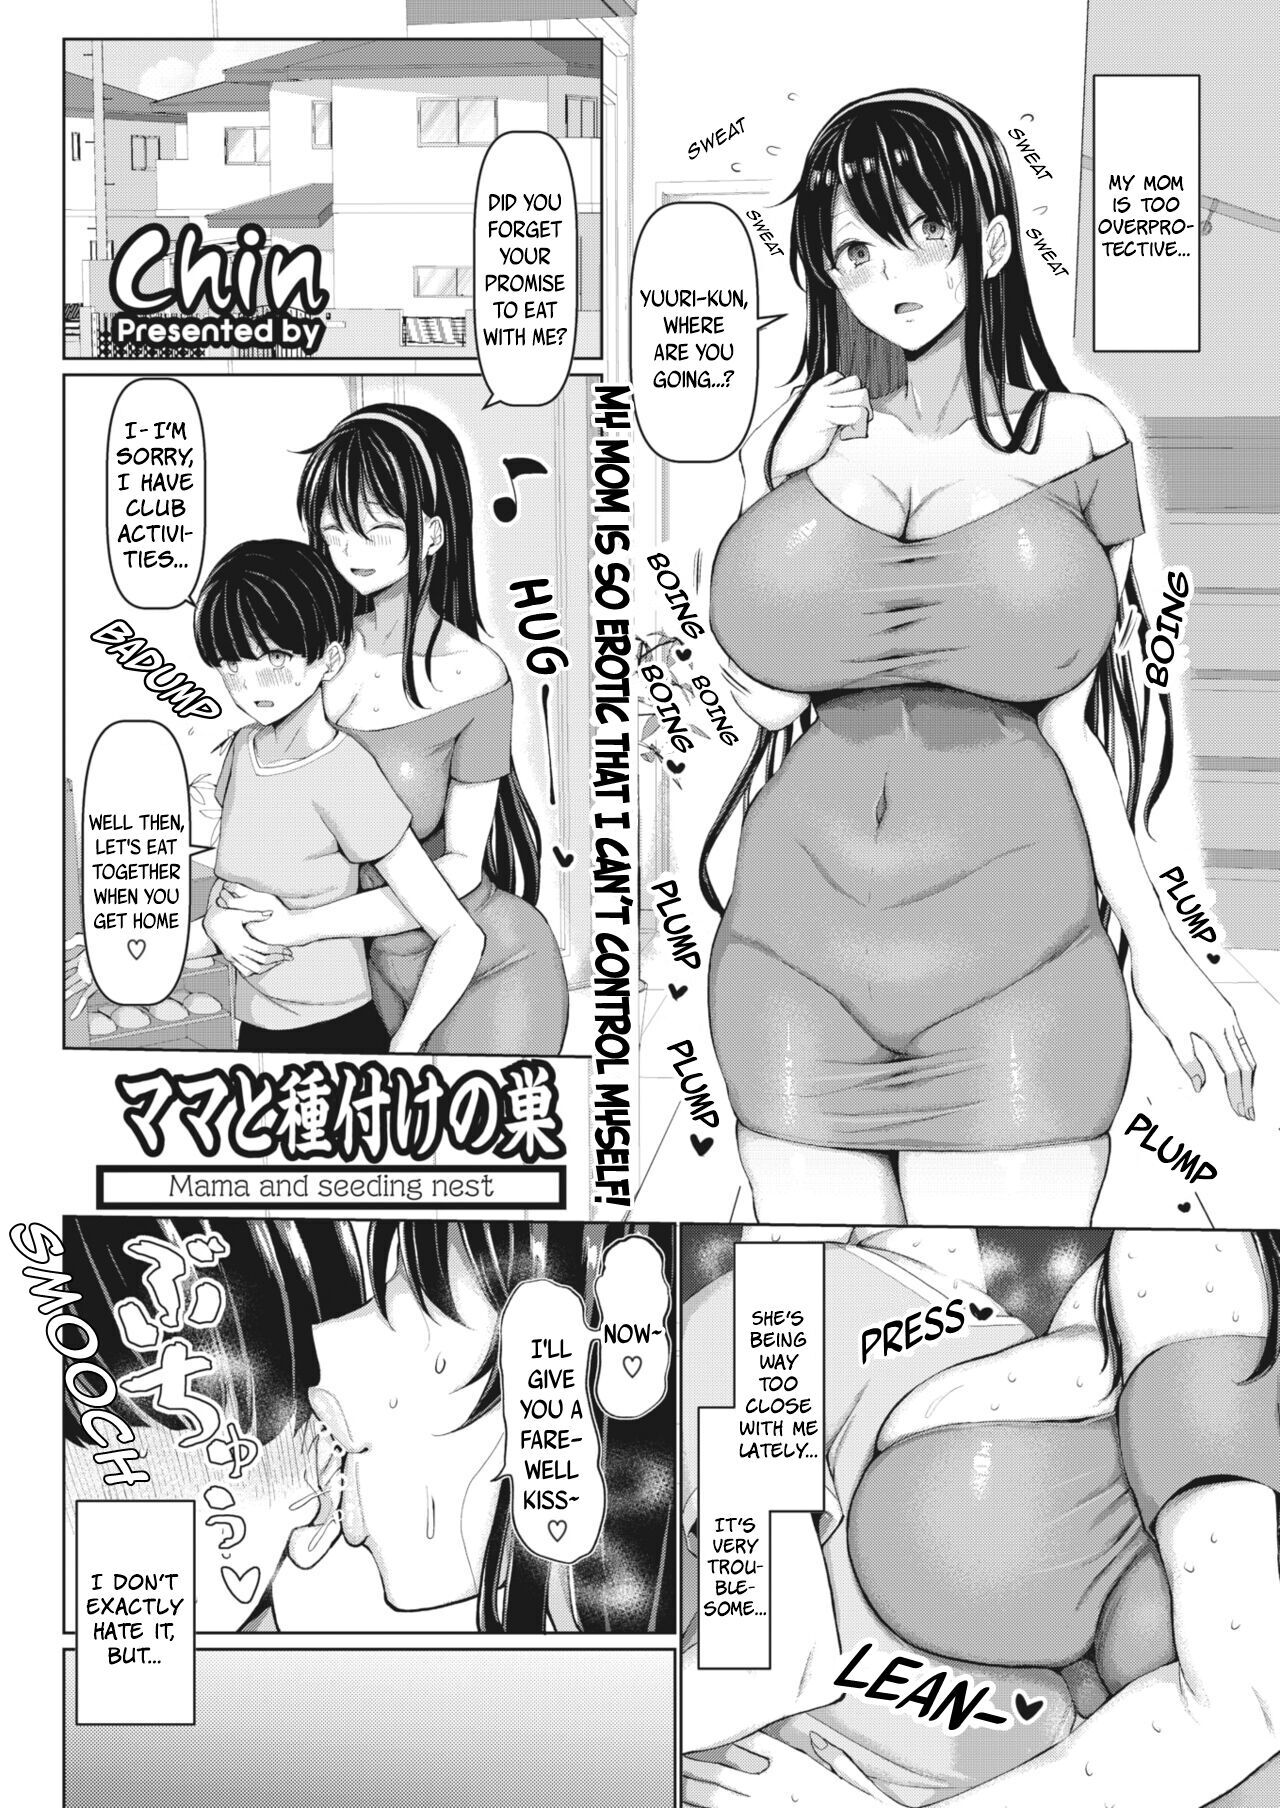 Manga Mom Porn - Mother - sorted by number of objects - Free Hentai